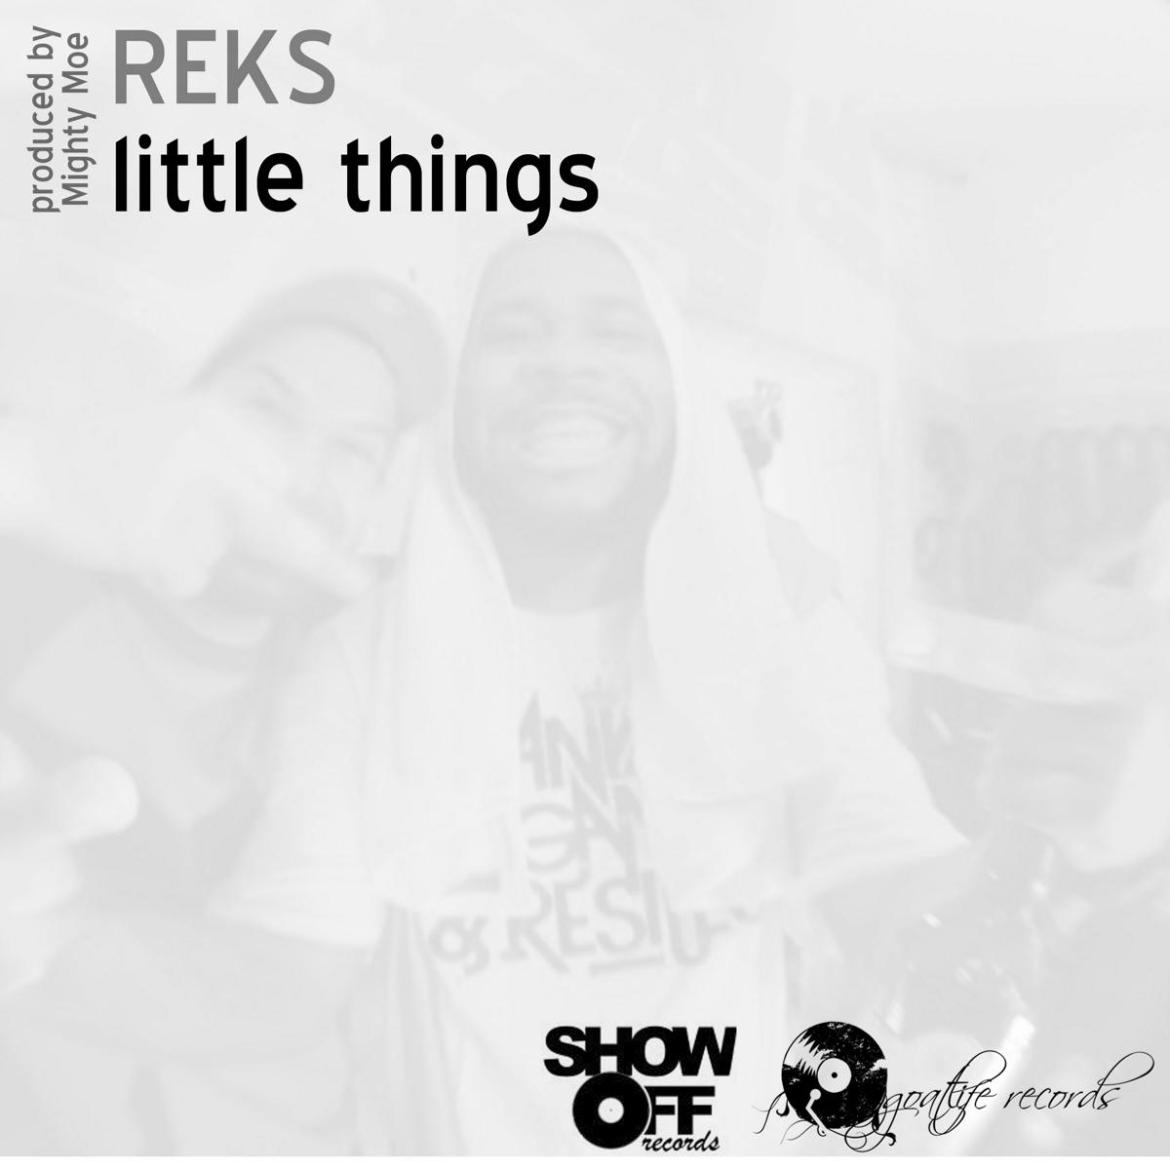 The Mighty Moe feat Reks - Little Things